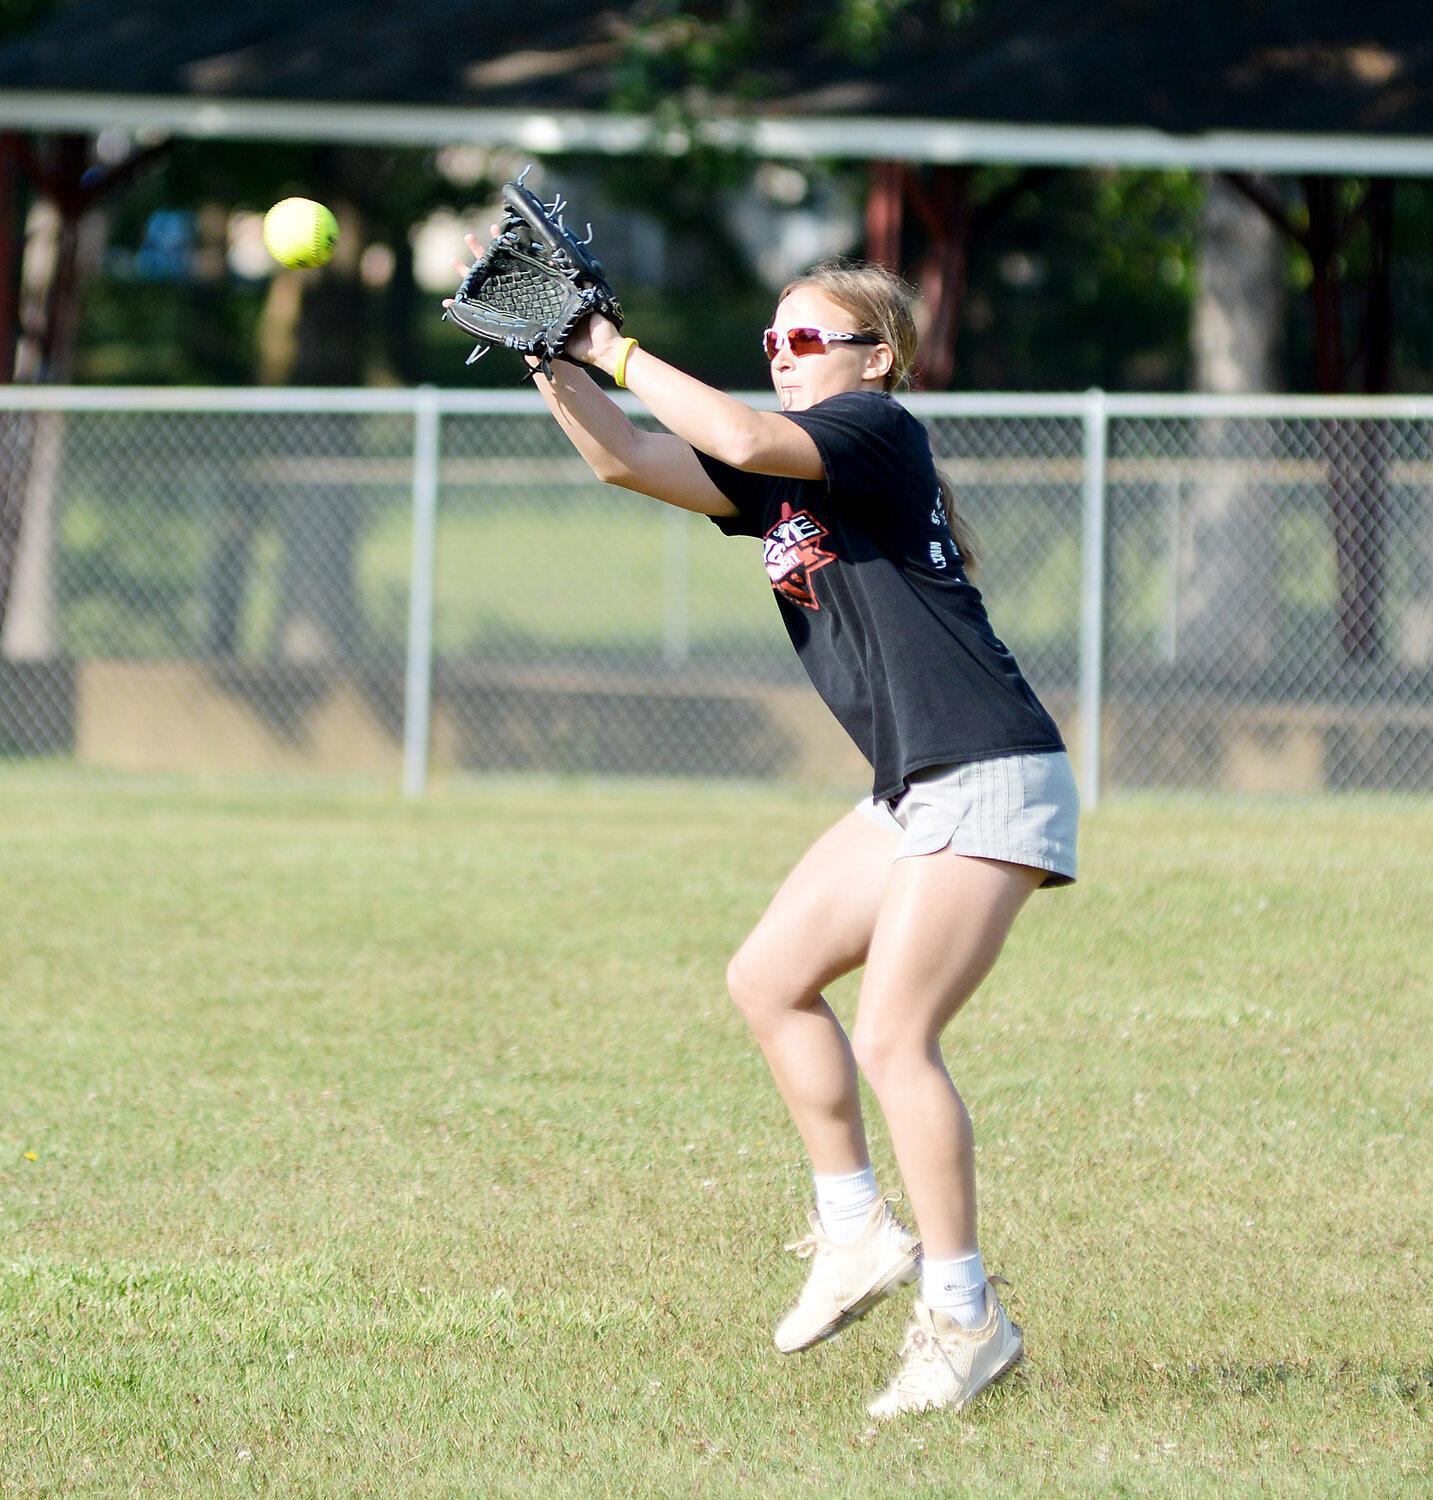 Aubrey Rehmert catches a ball before throwing it on to a teammate during Belle High School’s annual softball camp held back in June.